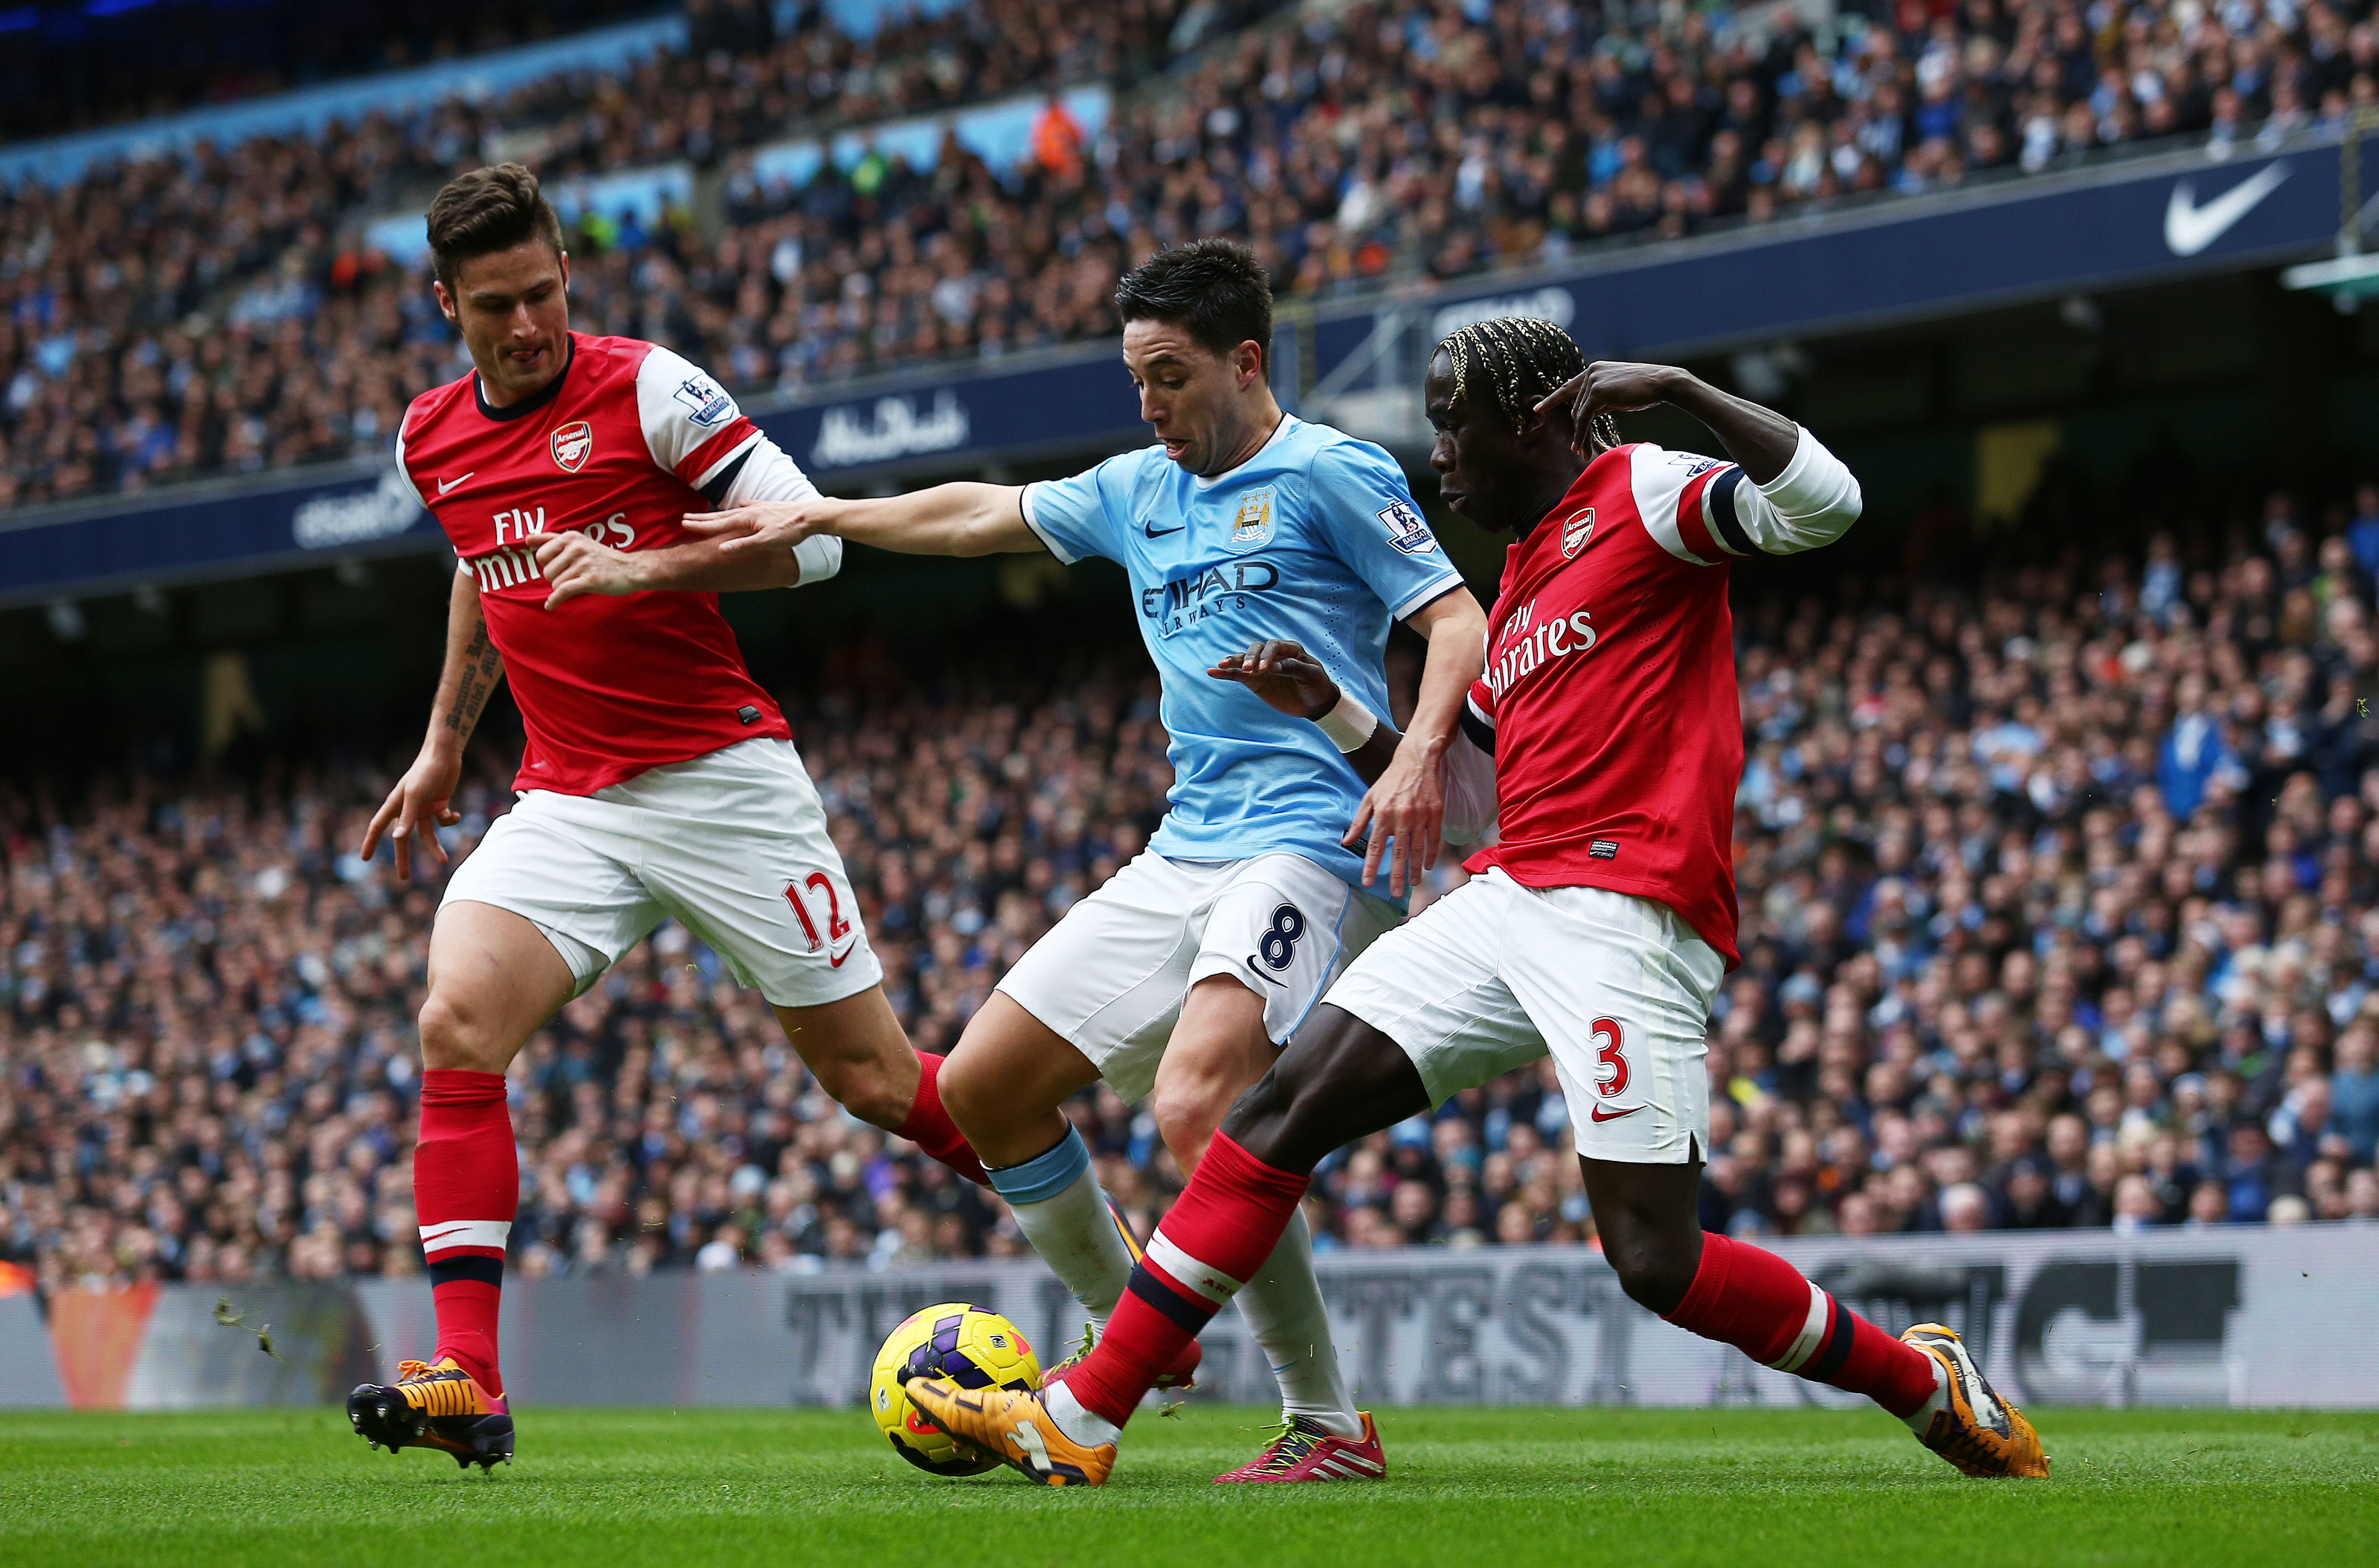 Samir Nasri of Manchester City in between Olivier Giroud and Bacary Sagna of Arsenal